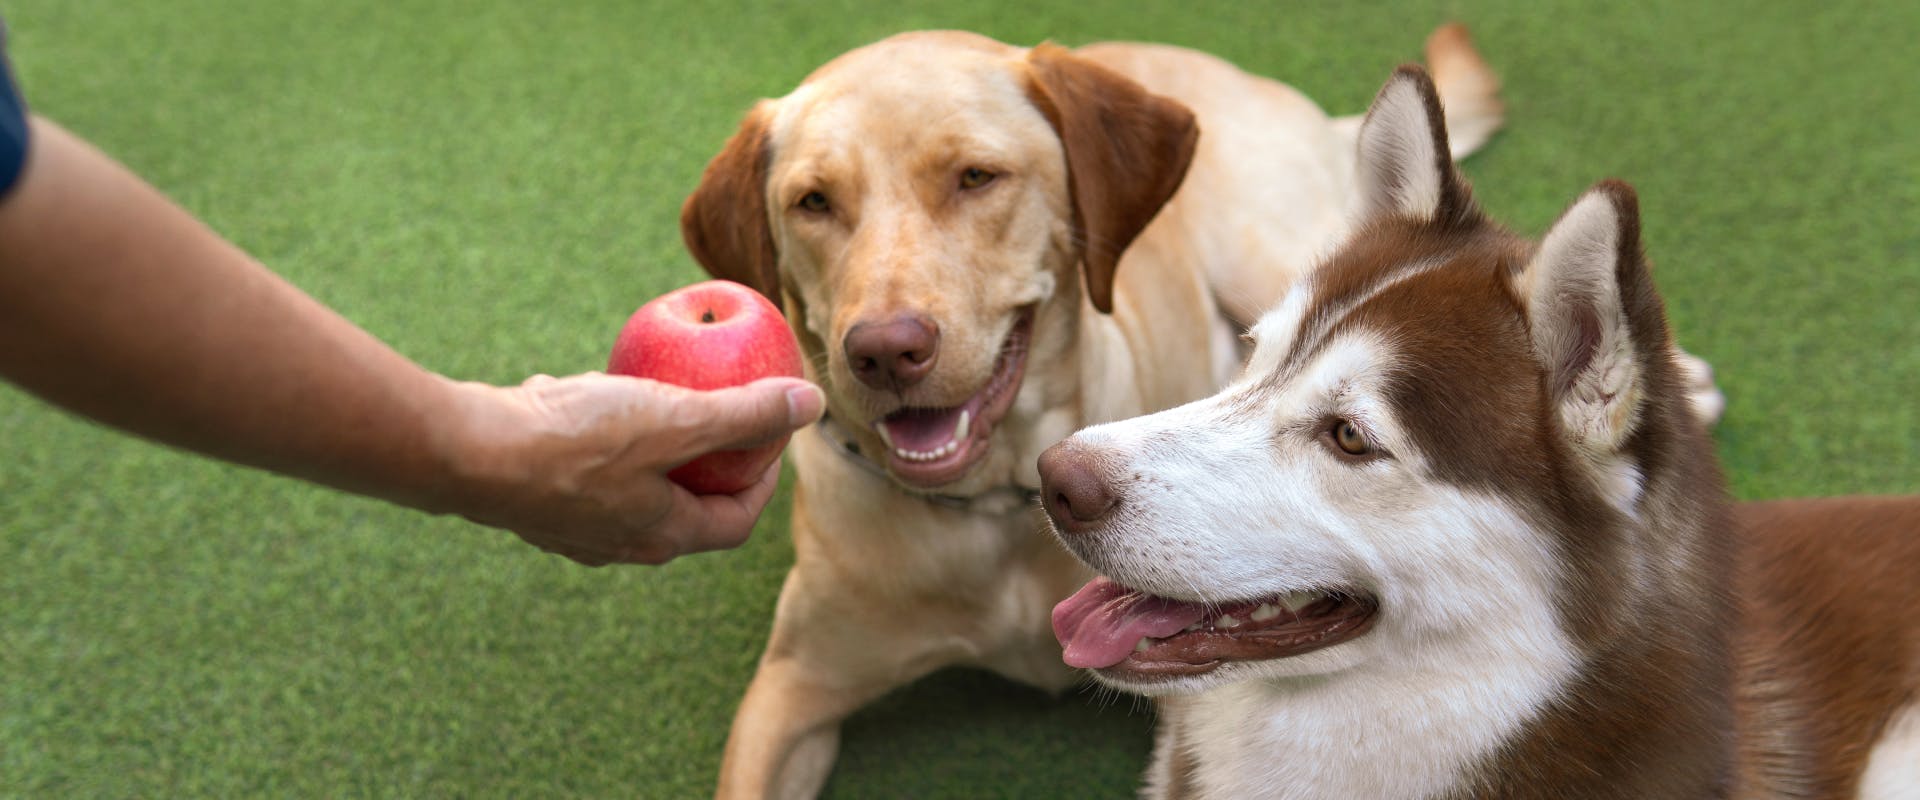 a labrador and a husky lying on fake grass looking at an apple being held out by a human hand